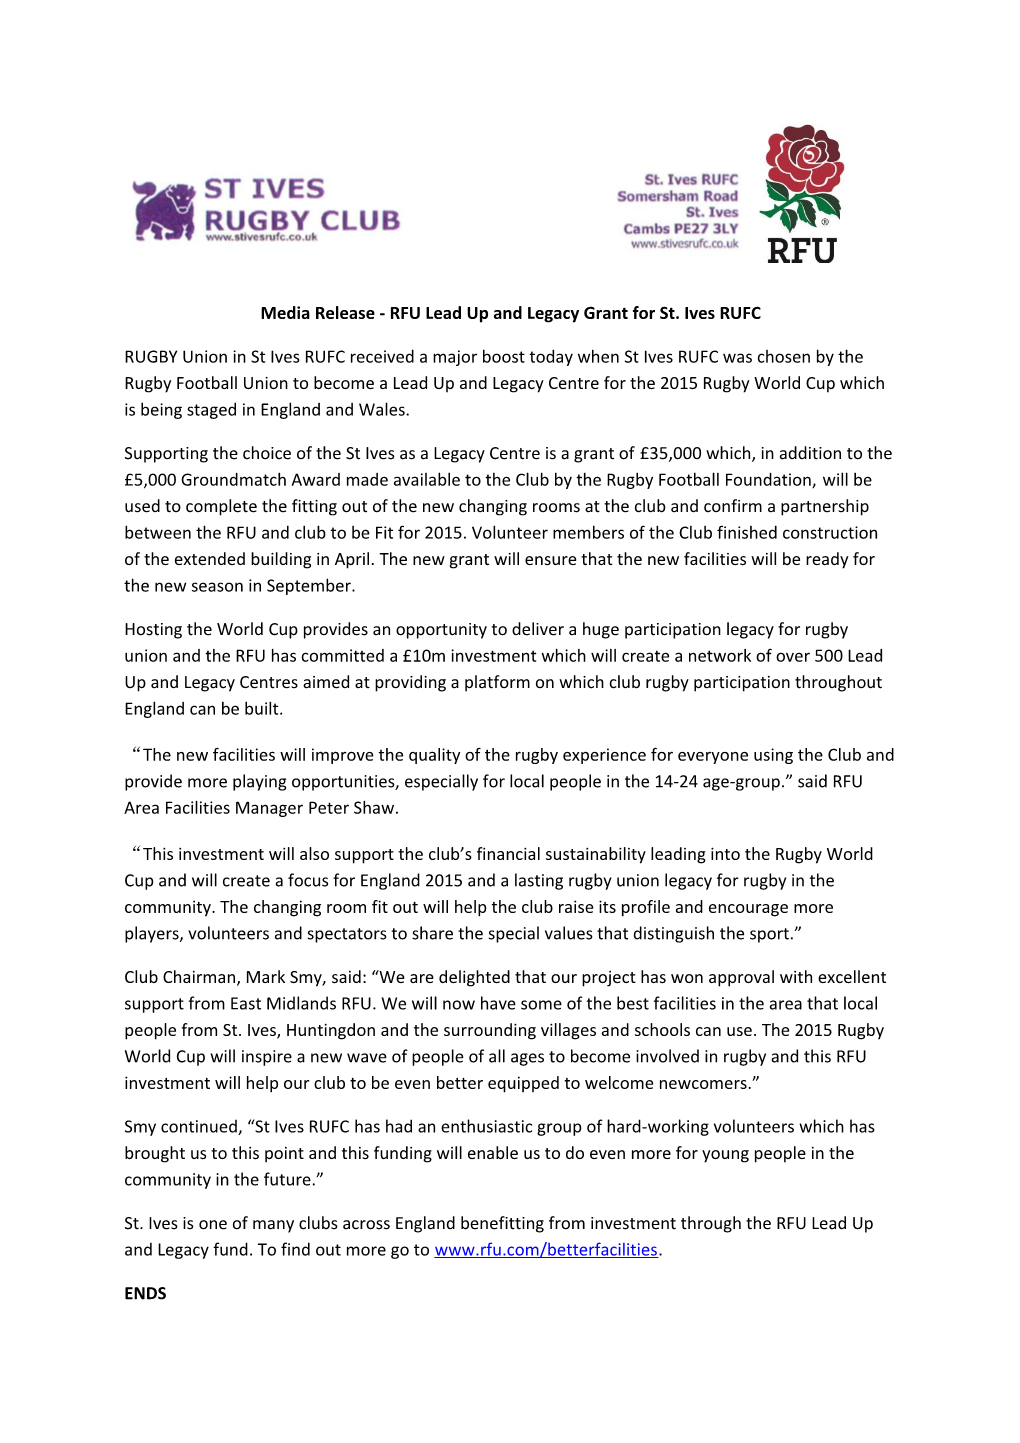 Media Release - RFU Lead up and Legacy Grant for St. Ives RUFC